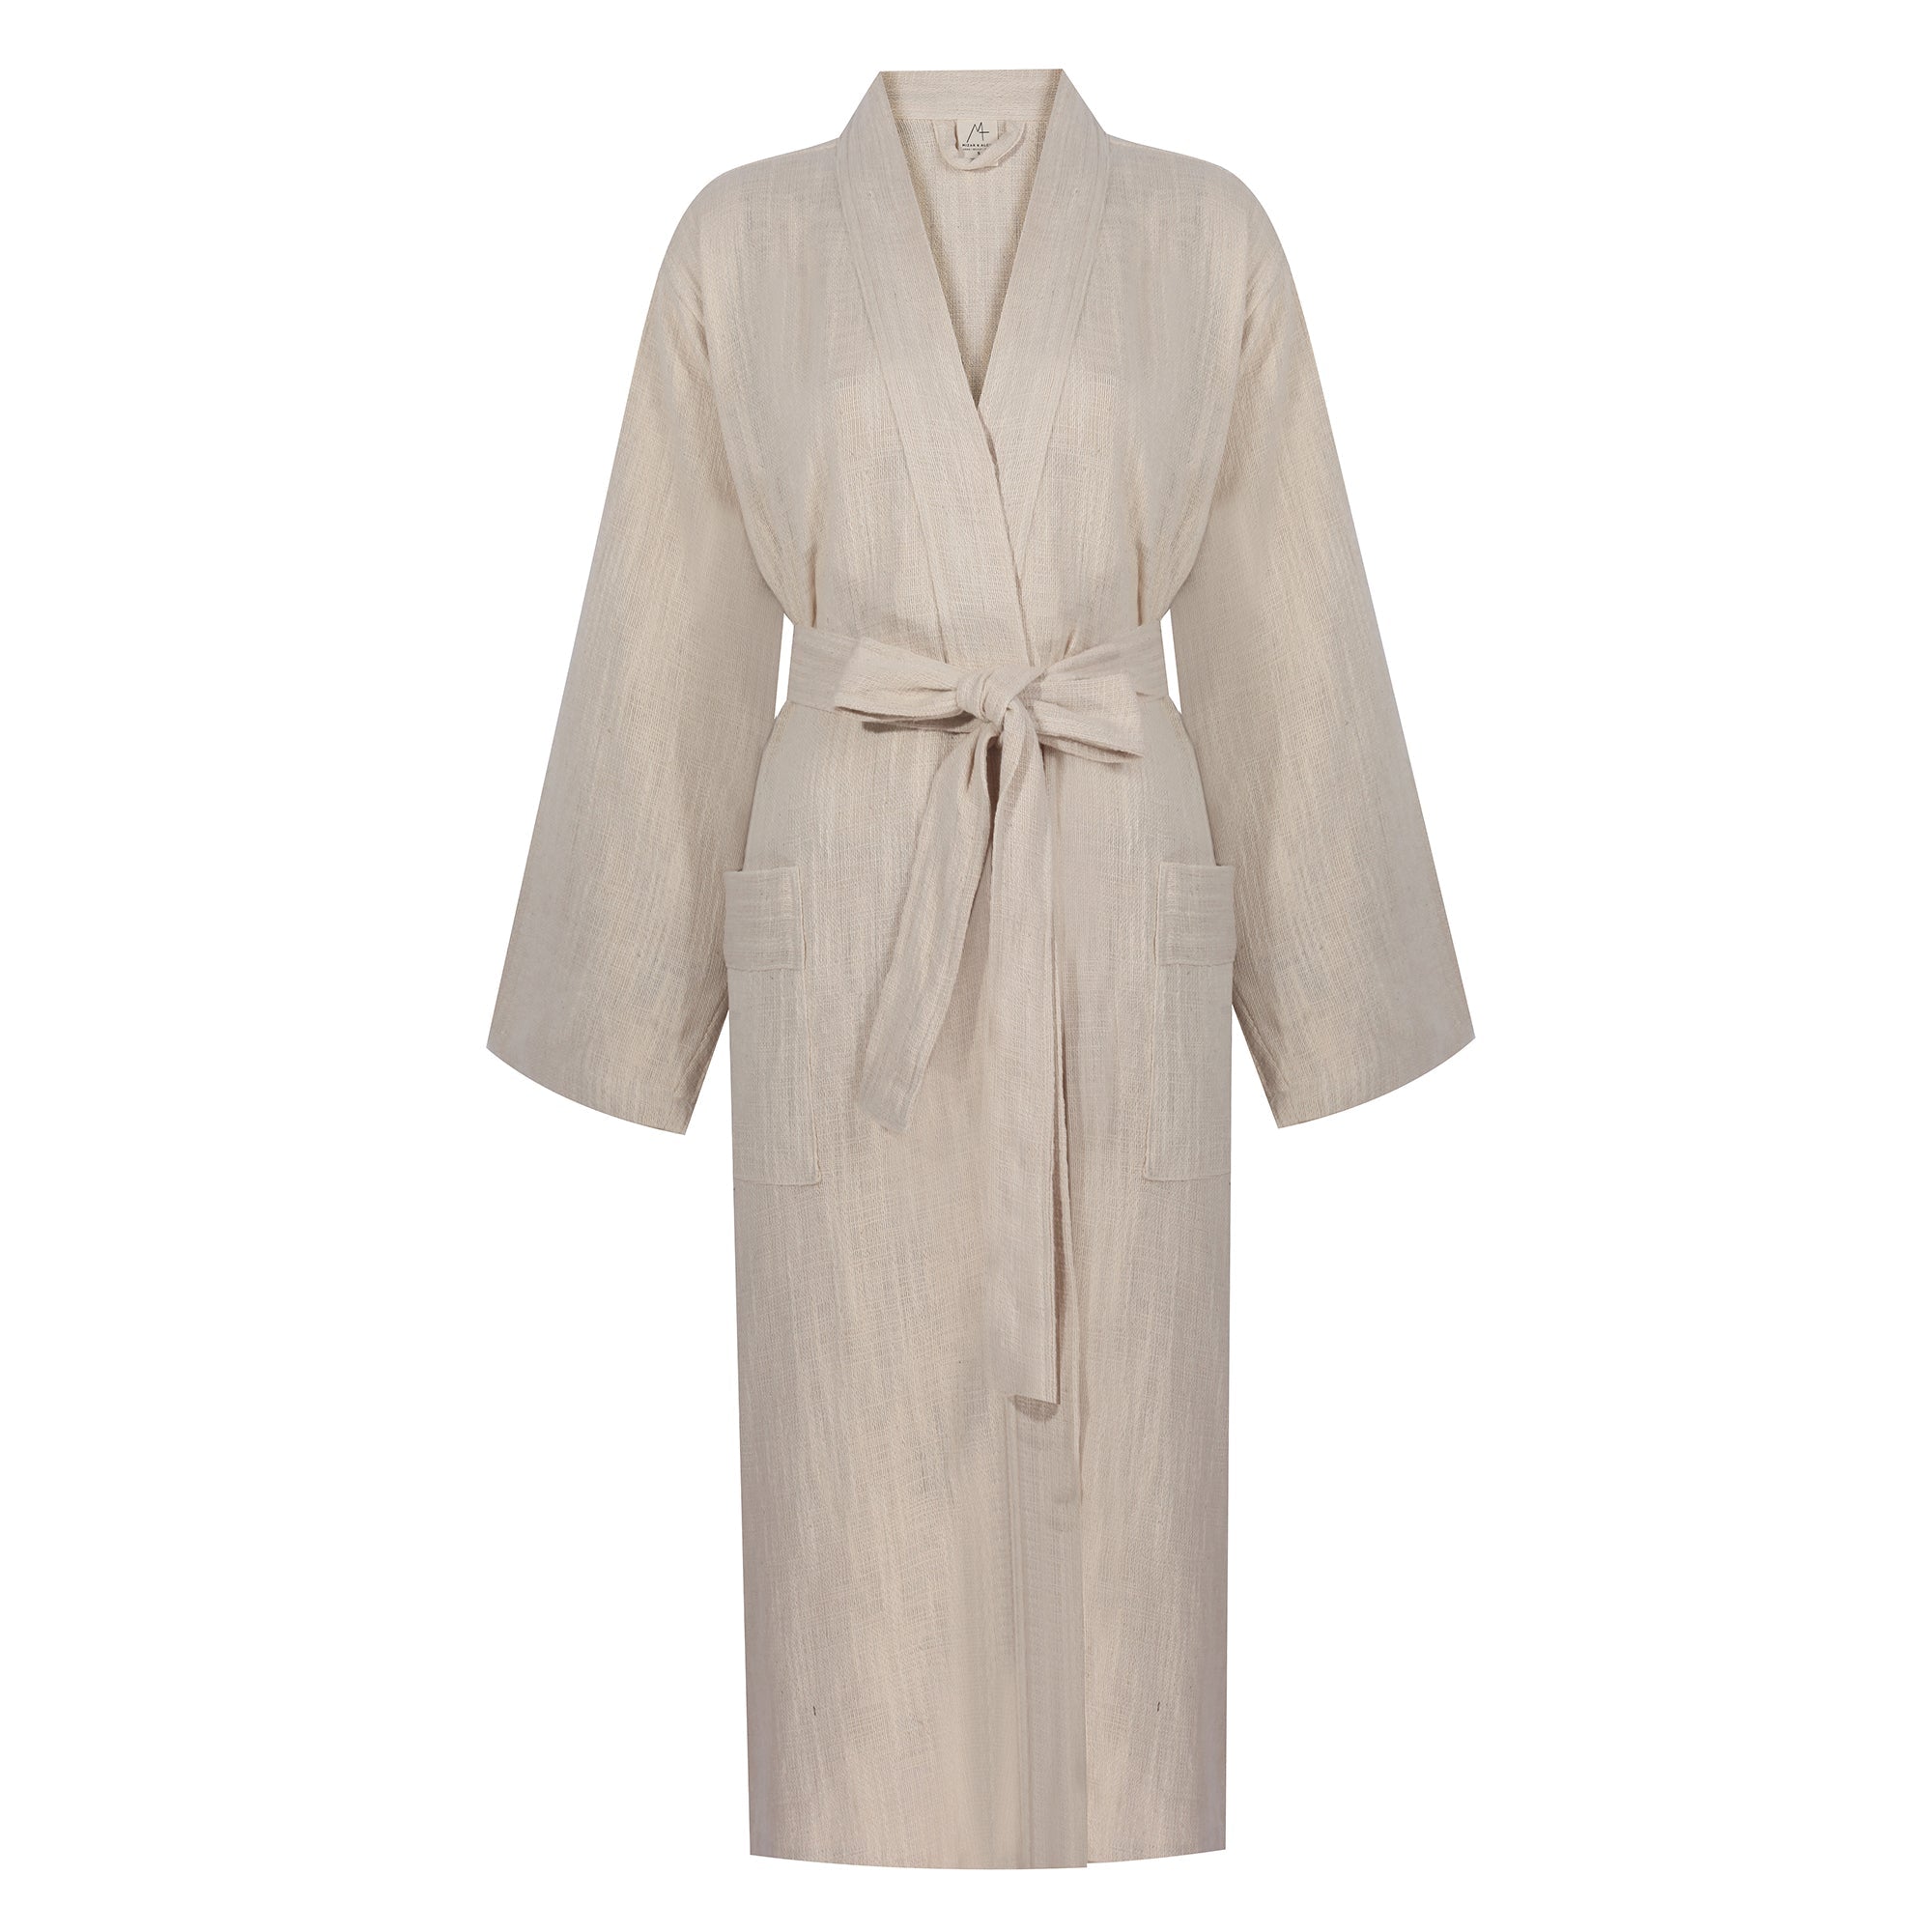 Buy Navy Blue Supersoft Ribbed Dressing Gown from Next New Zealand